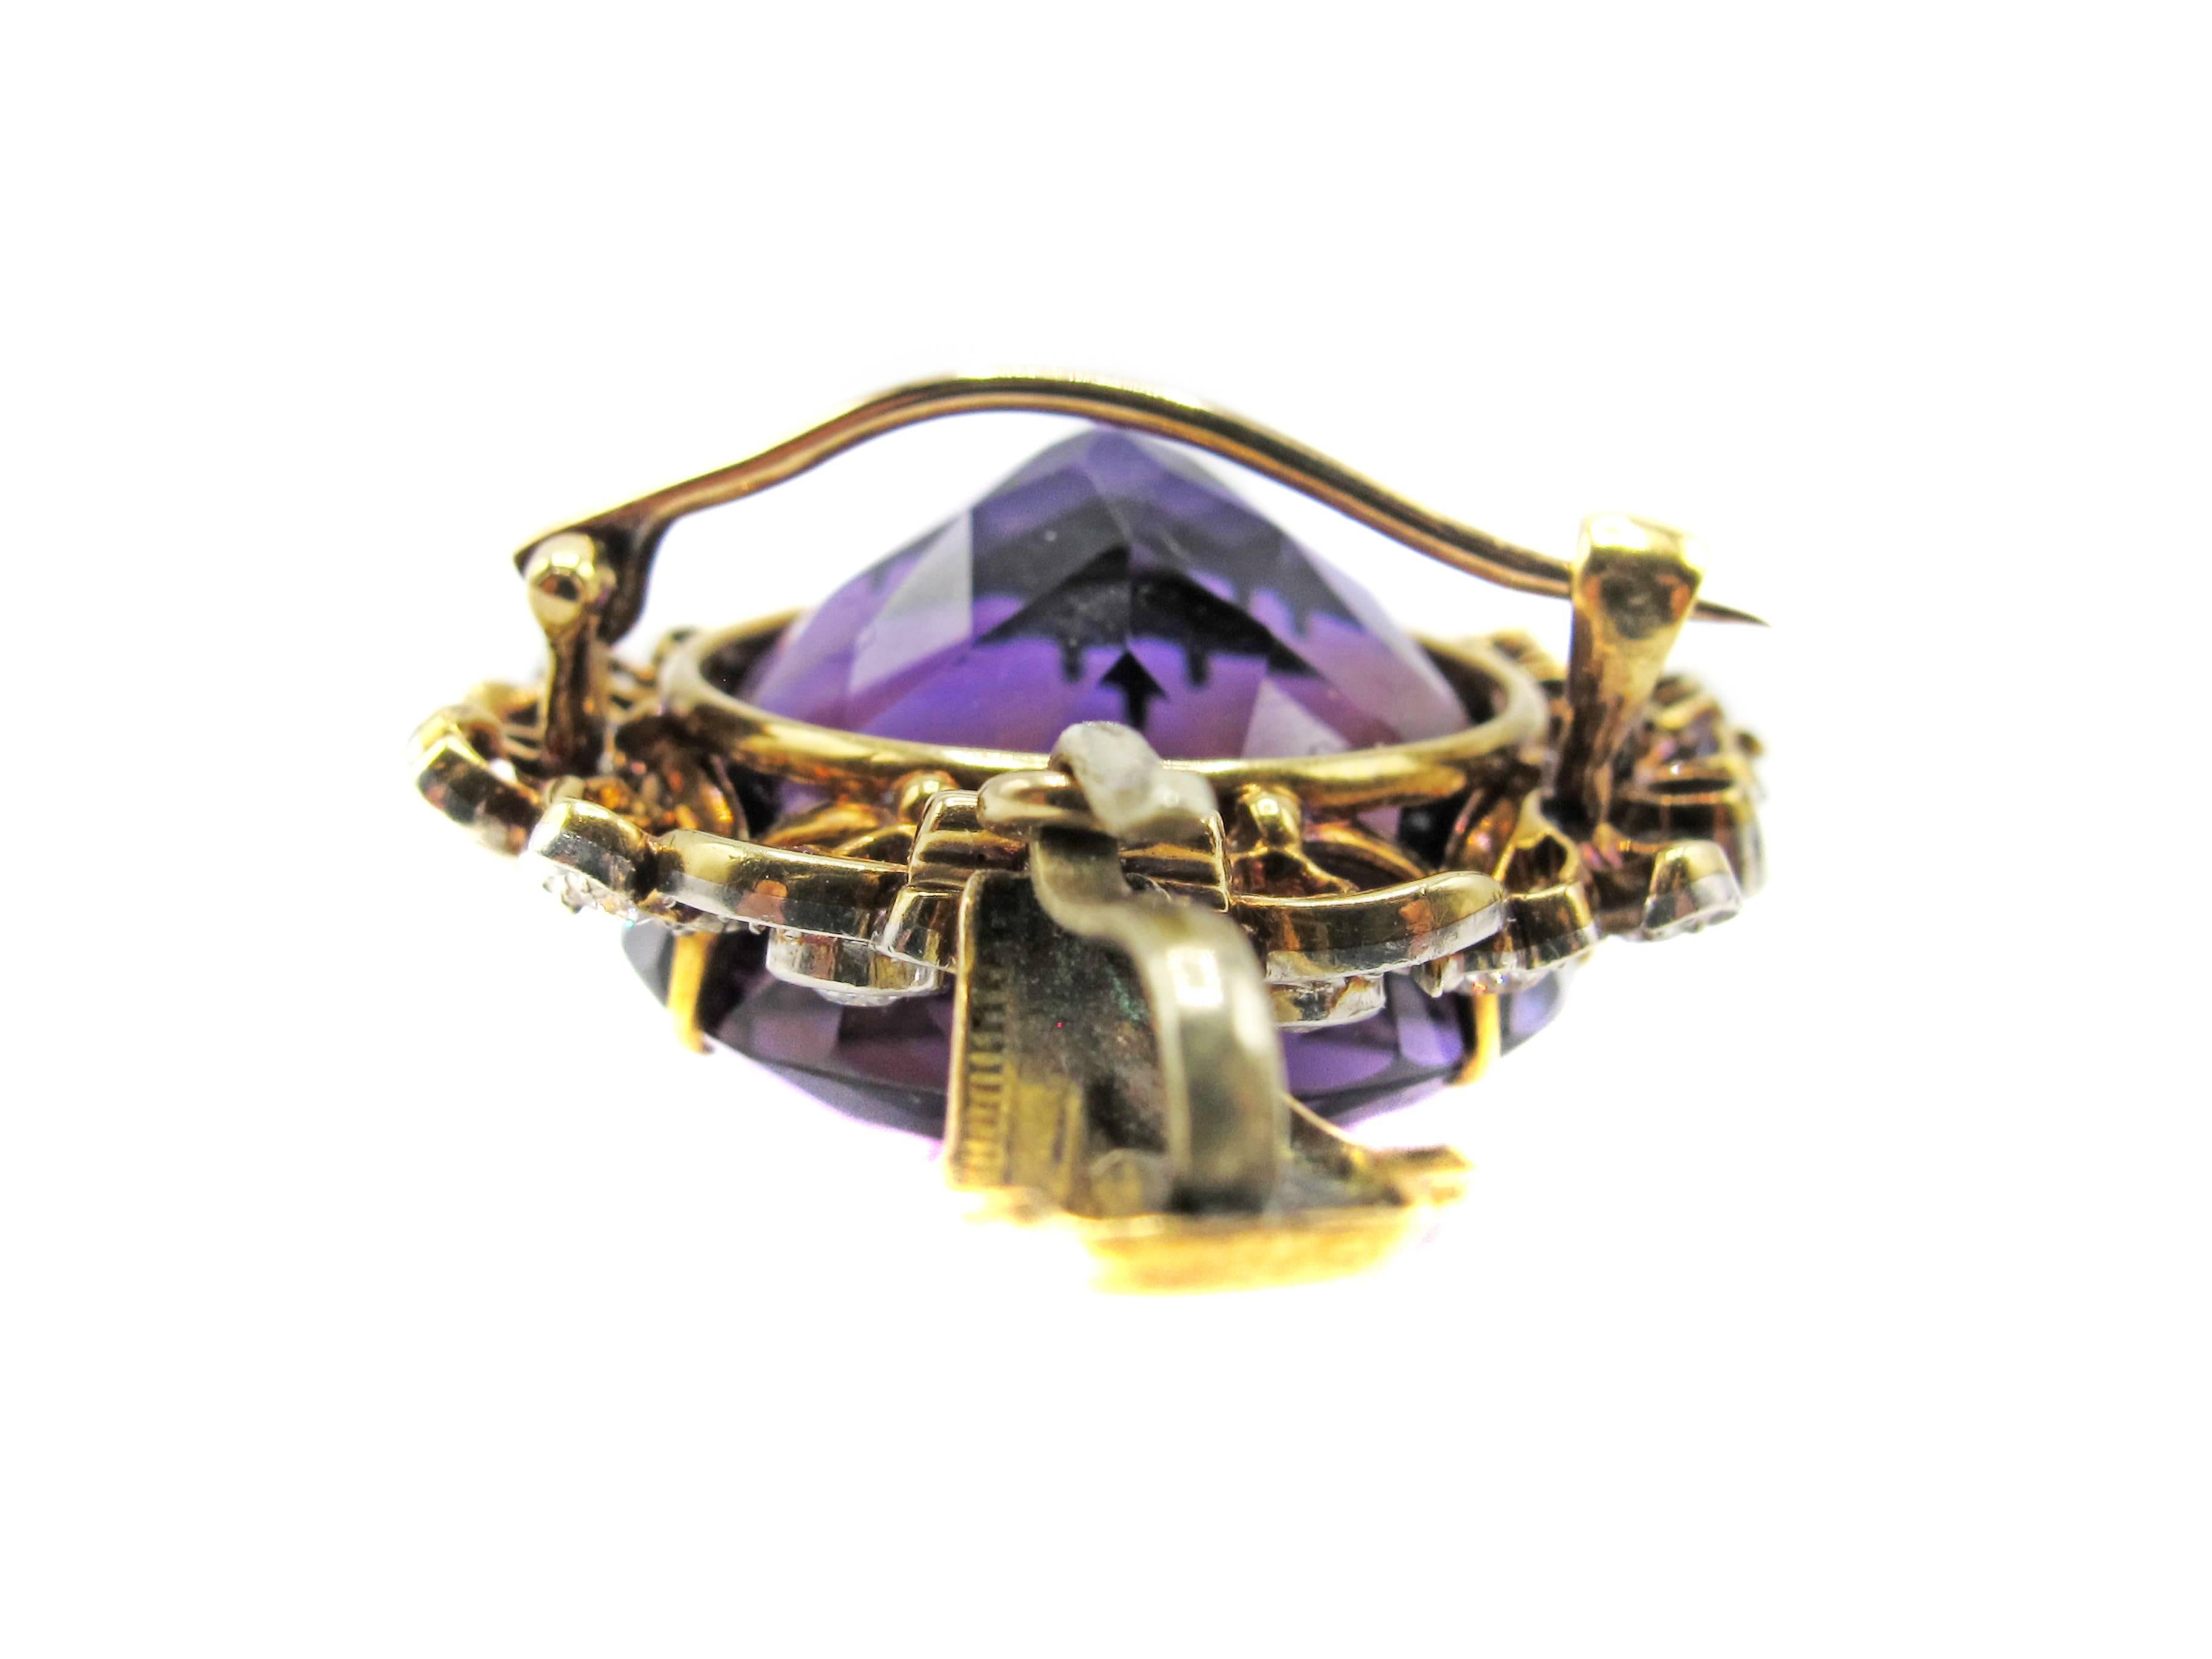 An amazing Siberian amethyst measured to weigh between 55-60 carats is the center piece of this incredible Belle Epoque pendant-brooch. The faceted round extremely well cut Amethyst displays a unique color saturation of deep bright purple with